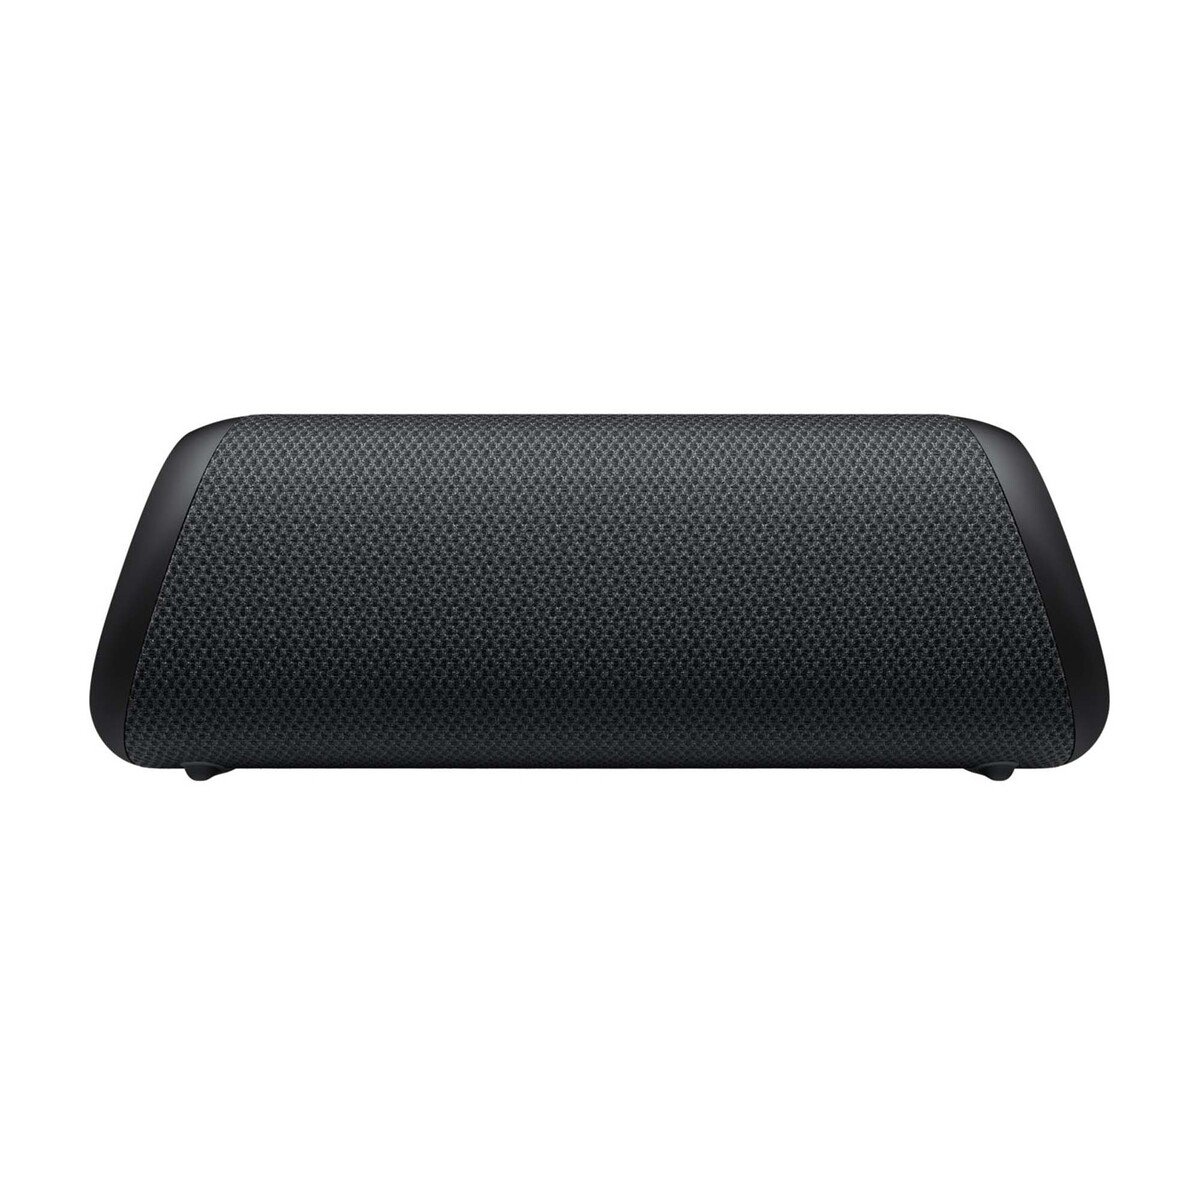 LG XBOOM Go Portable Bluetooth Speaker with up to 18 hr Battery, Black, XG5QBK